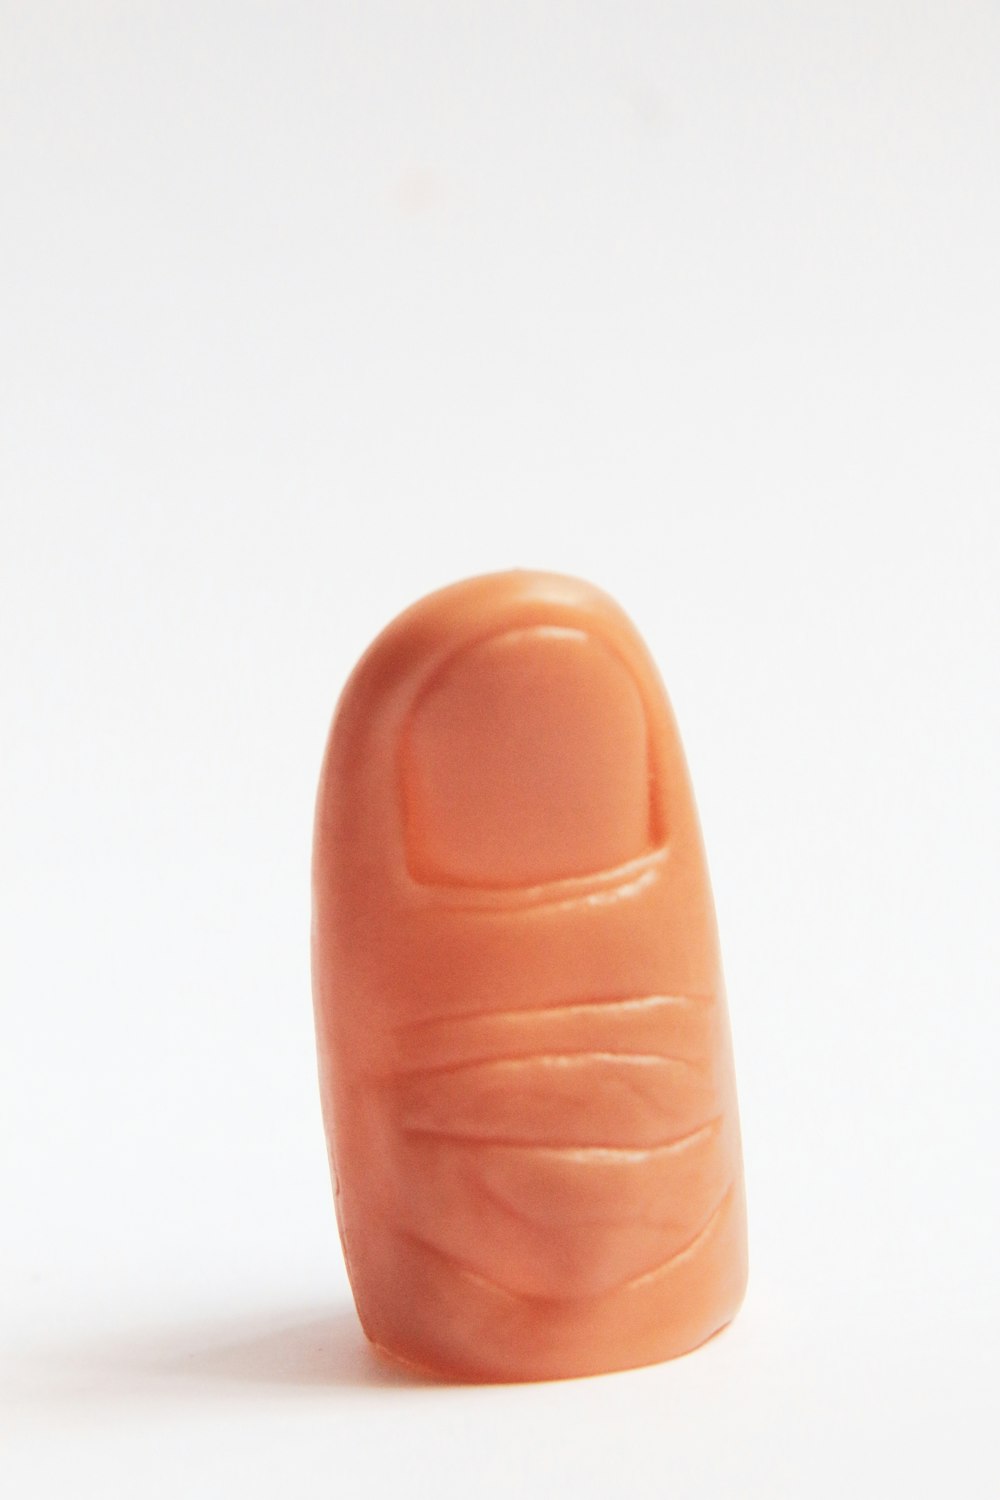 persons finger with white background